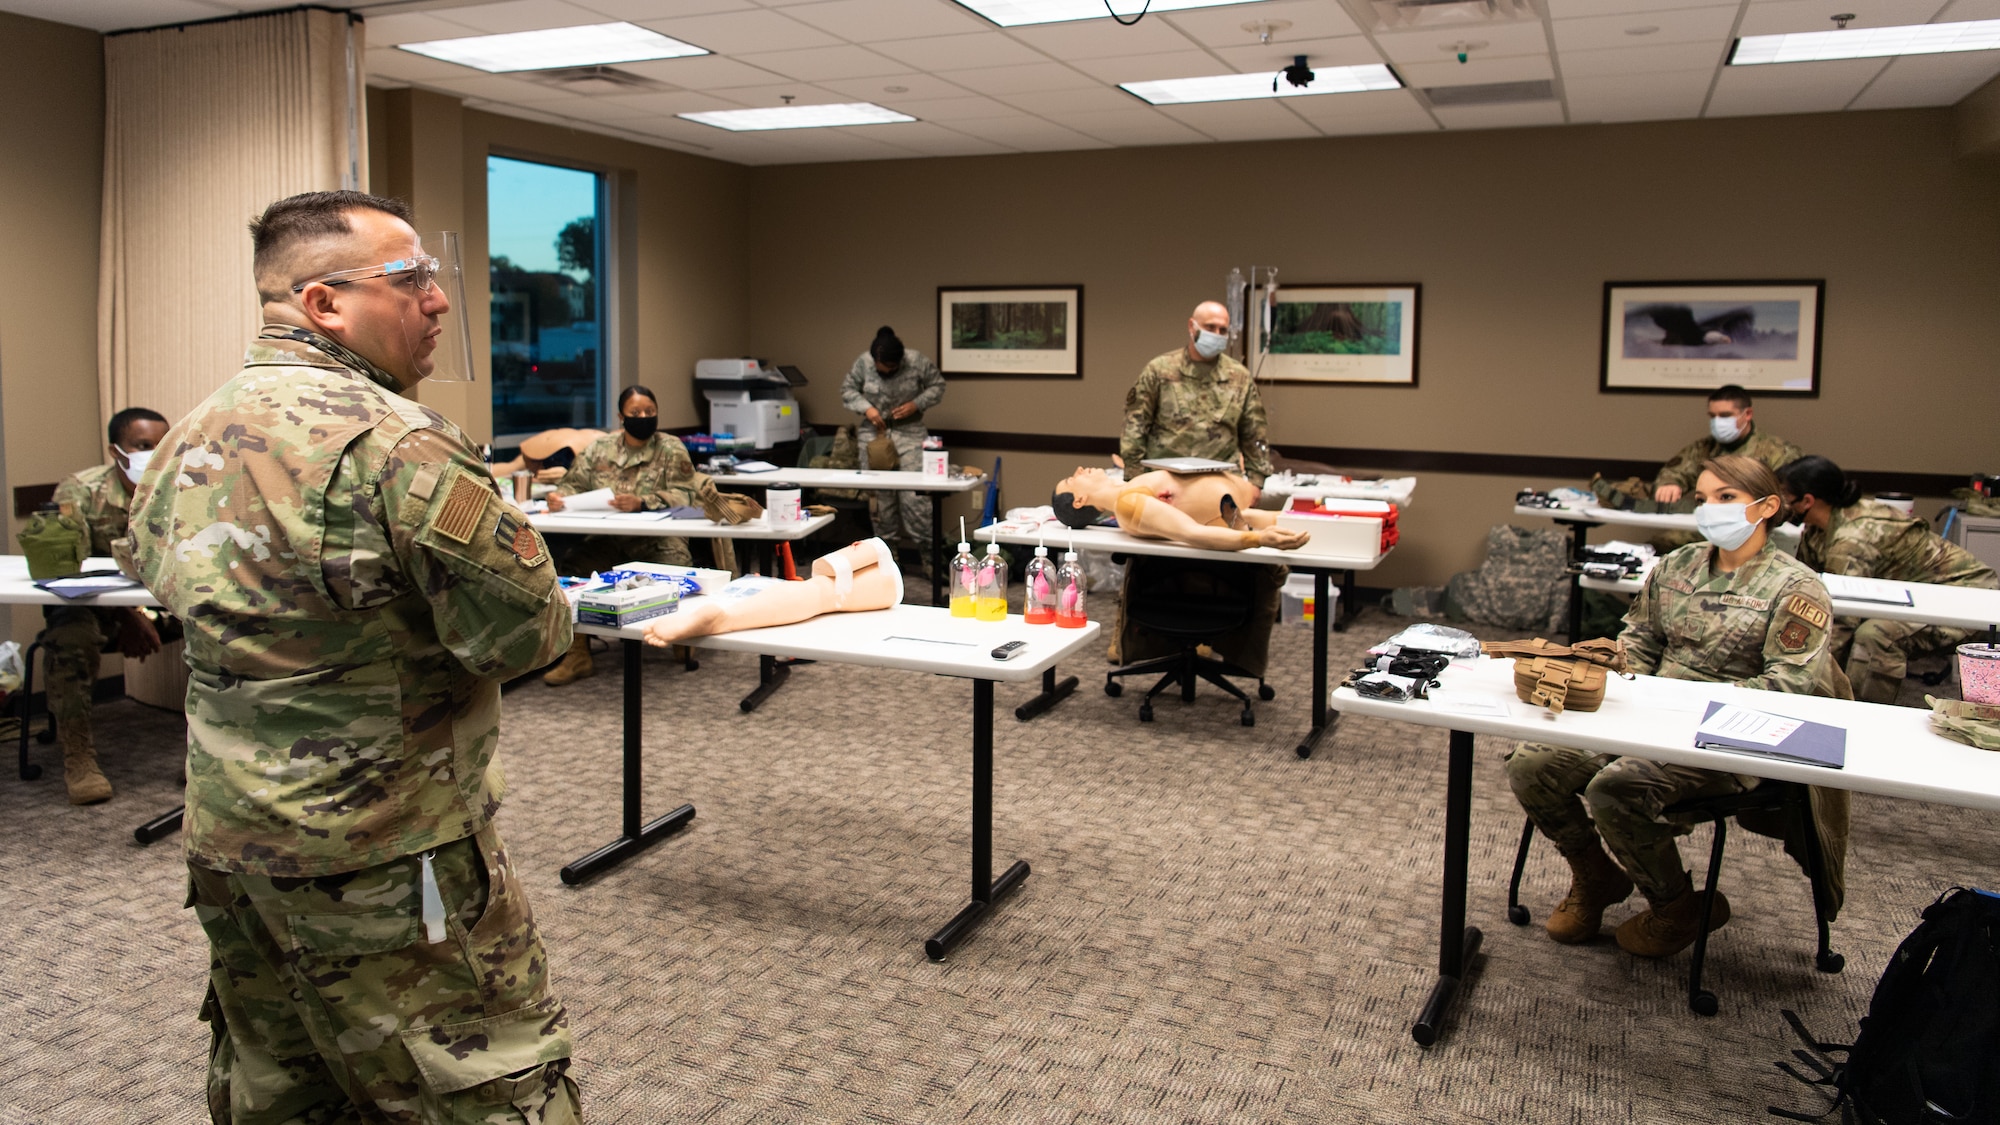 Lt. Col. John A. Camacho-Ayala, 2nd Medical Group health care integrator and director of medical management, teaches a class on Tactical Combat Casualty Care (TCCC) at Barksdale Air Force Base, La., Dec. 7, 2020.